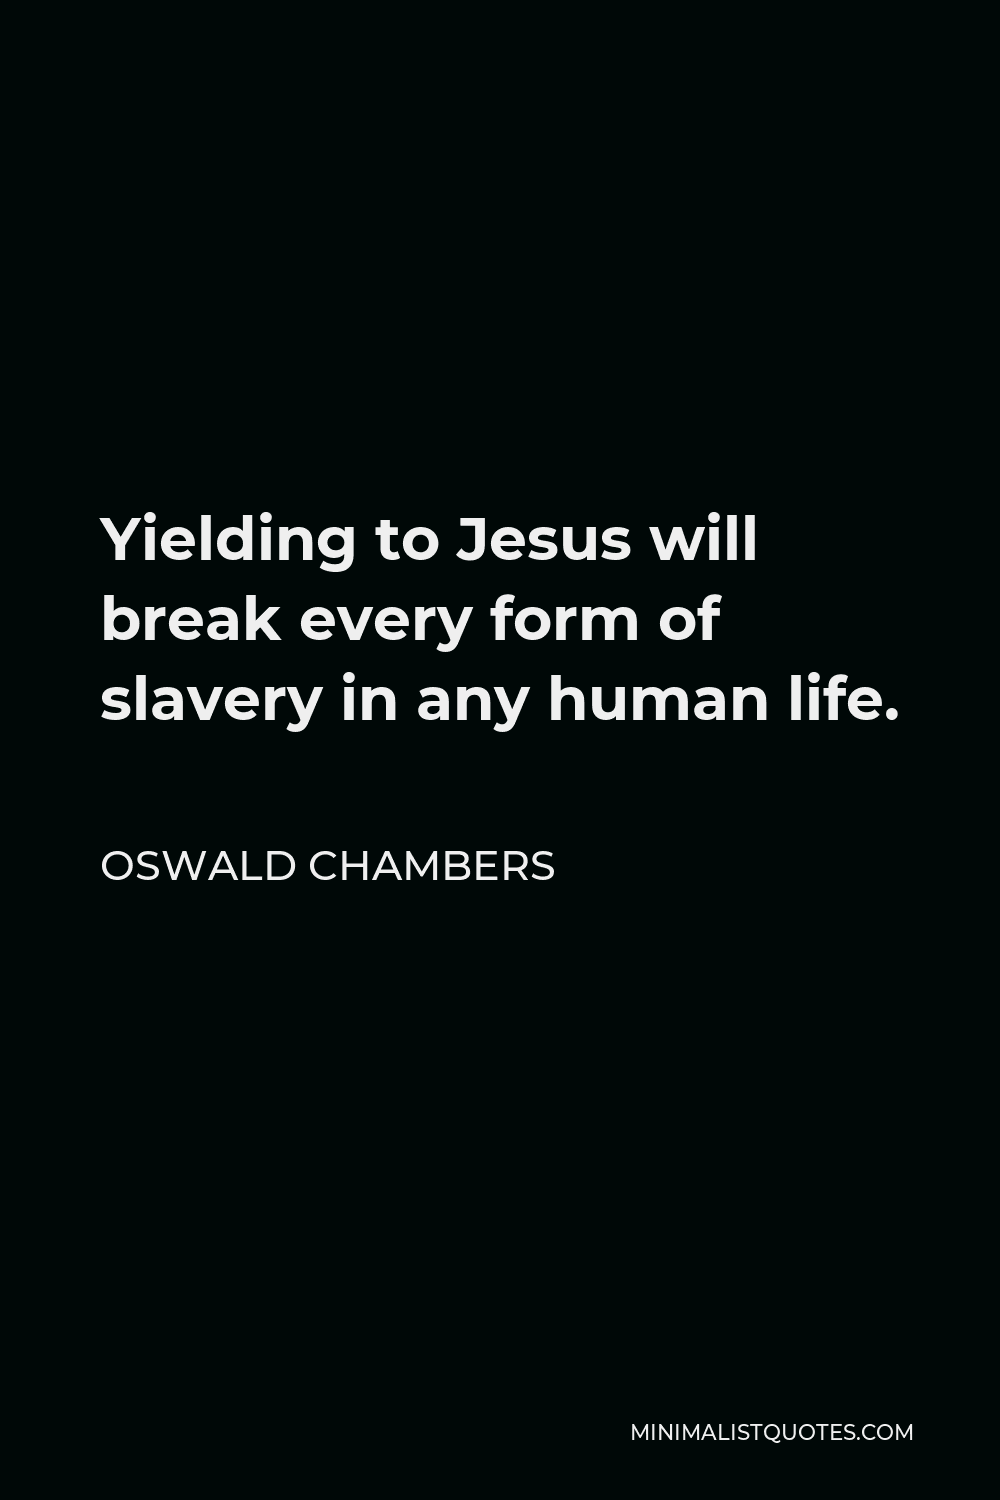 Oswald Chambers Quote - Yielding to Jesus will break every form of slavery in any human life.